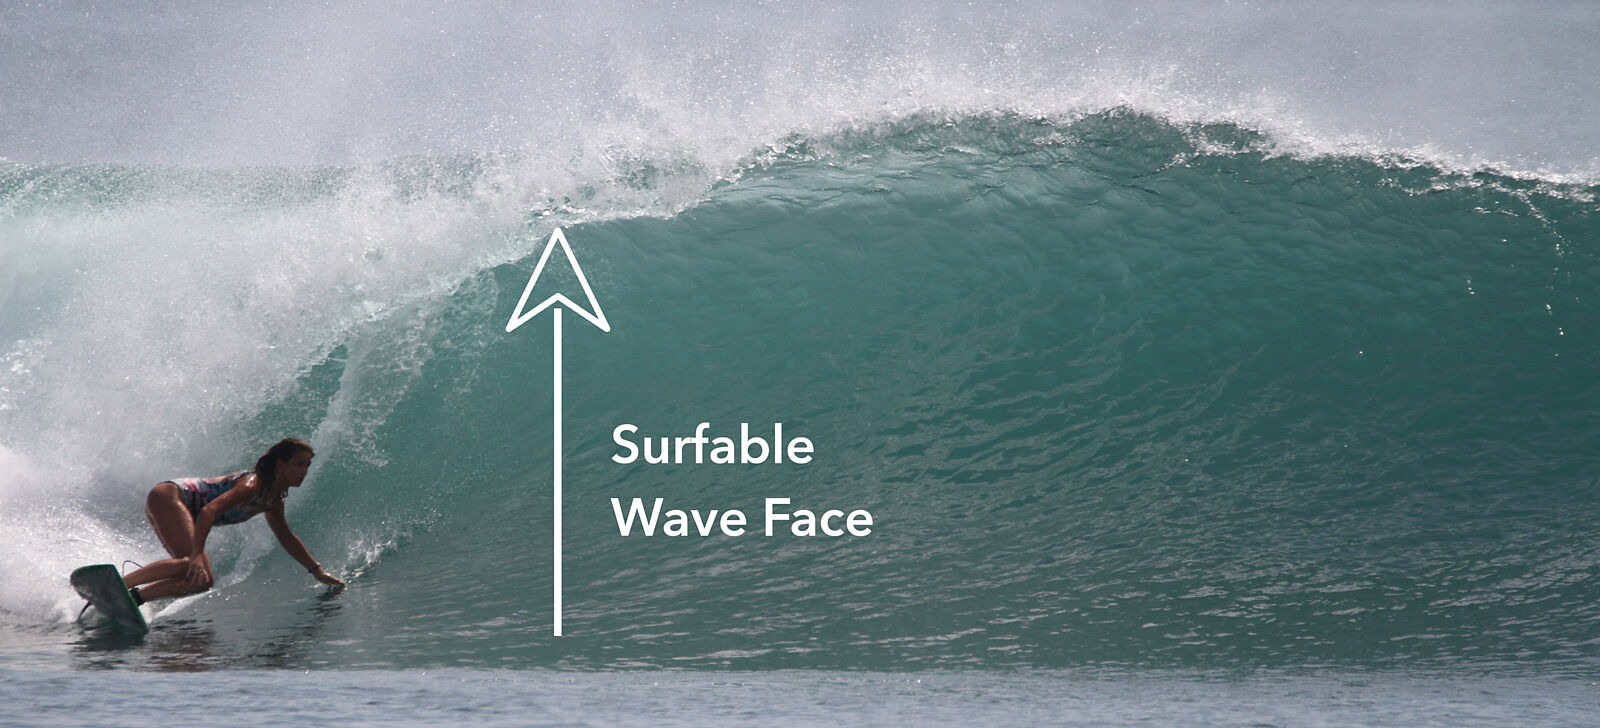 Surfable wave height measurement